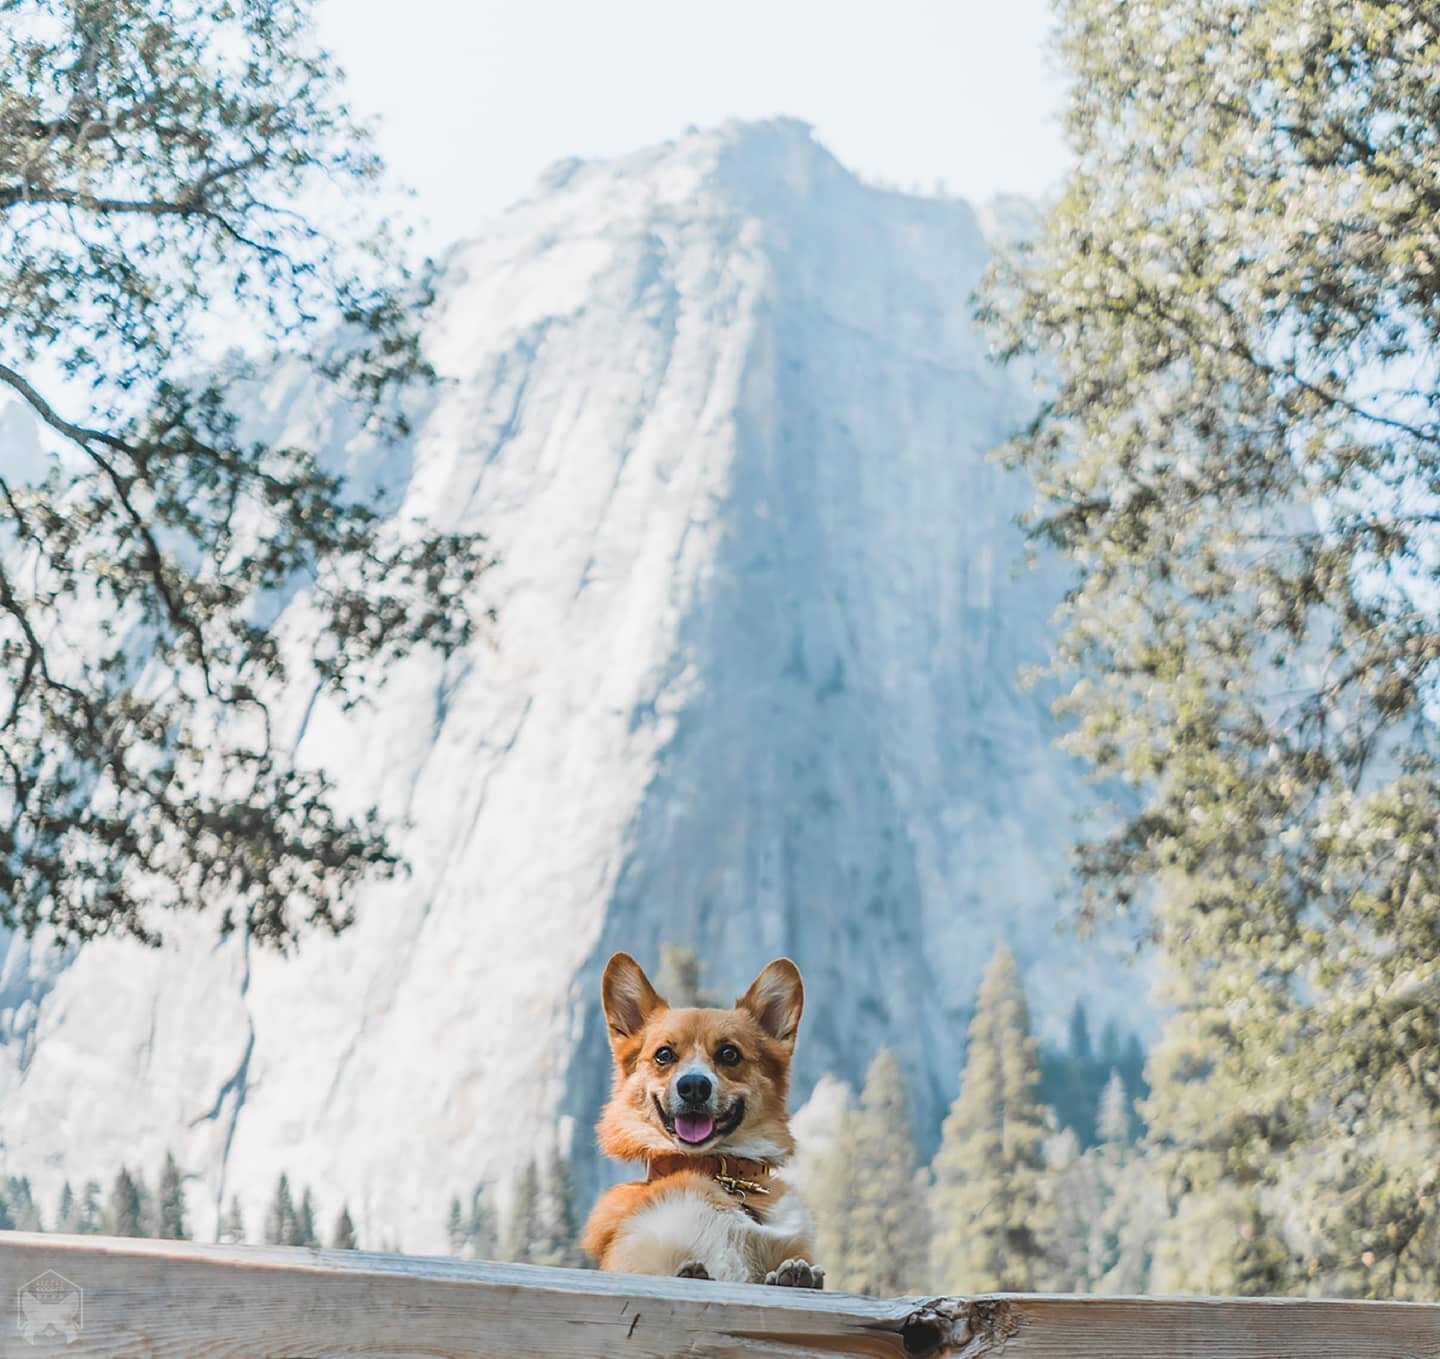 Not all bread are corgis but all corgis are bread. #thanksforcomingtomytedtalk
.
It's been so long since we last went to Yosemite, more than a year ago. We had plans for visiting the Eastern Sierra in October but will cancel that until further notice